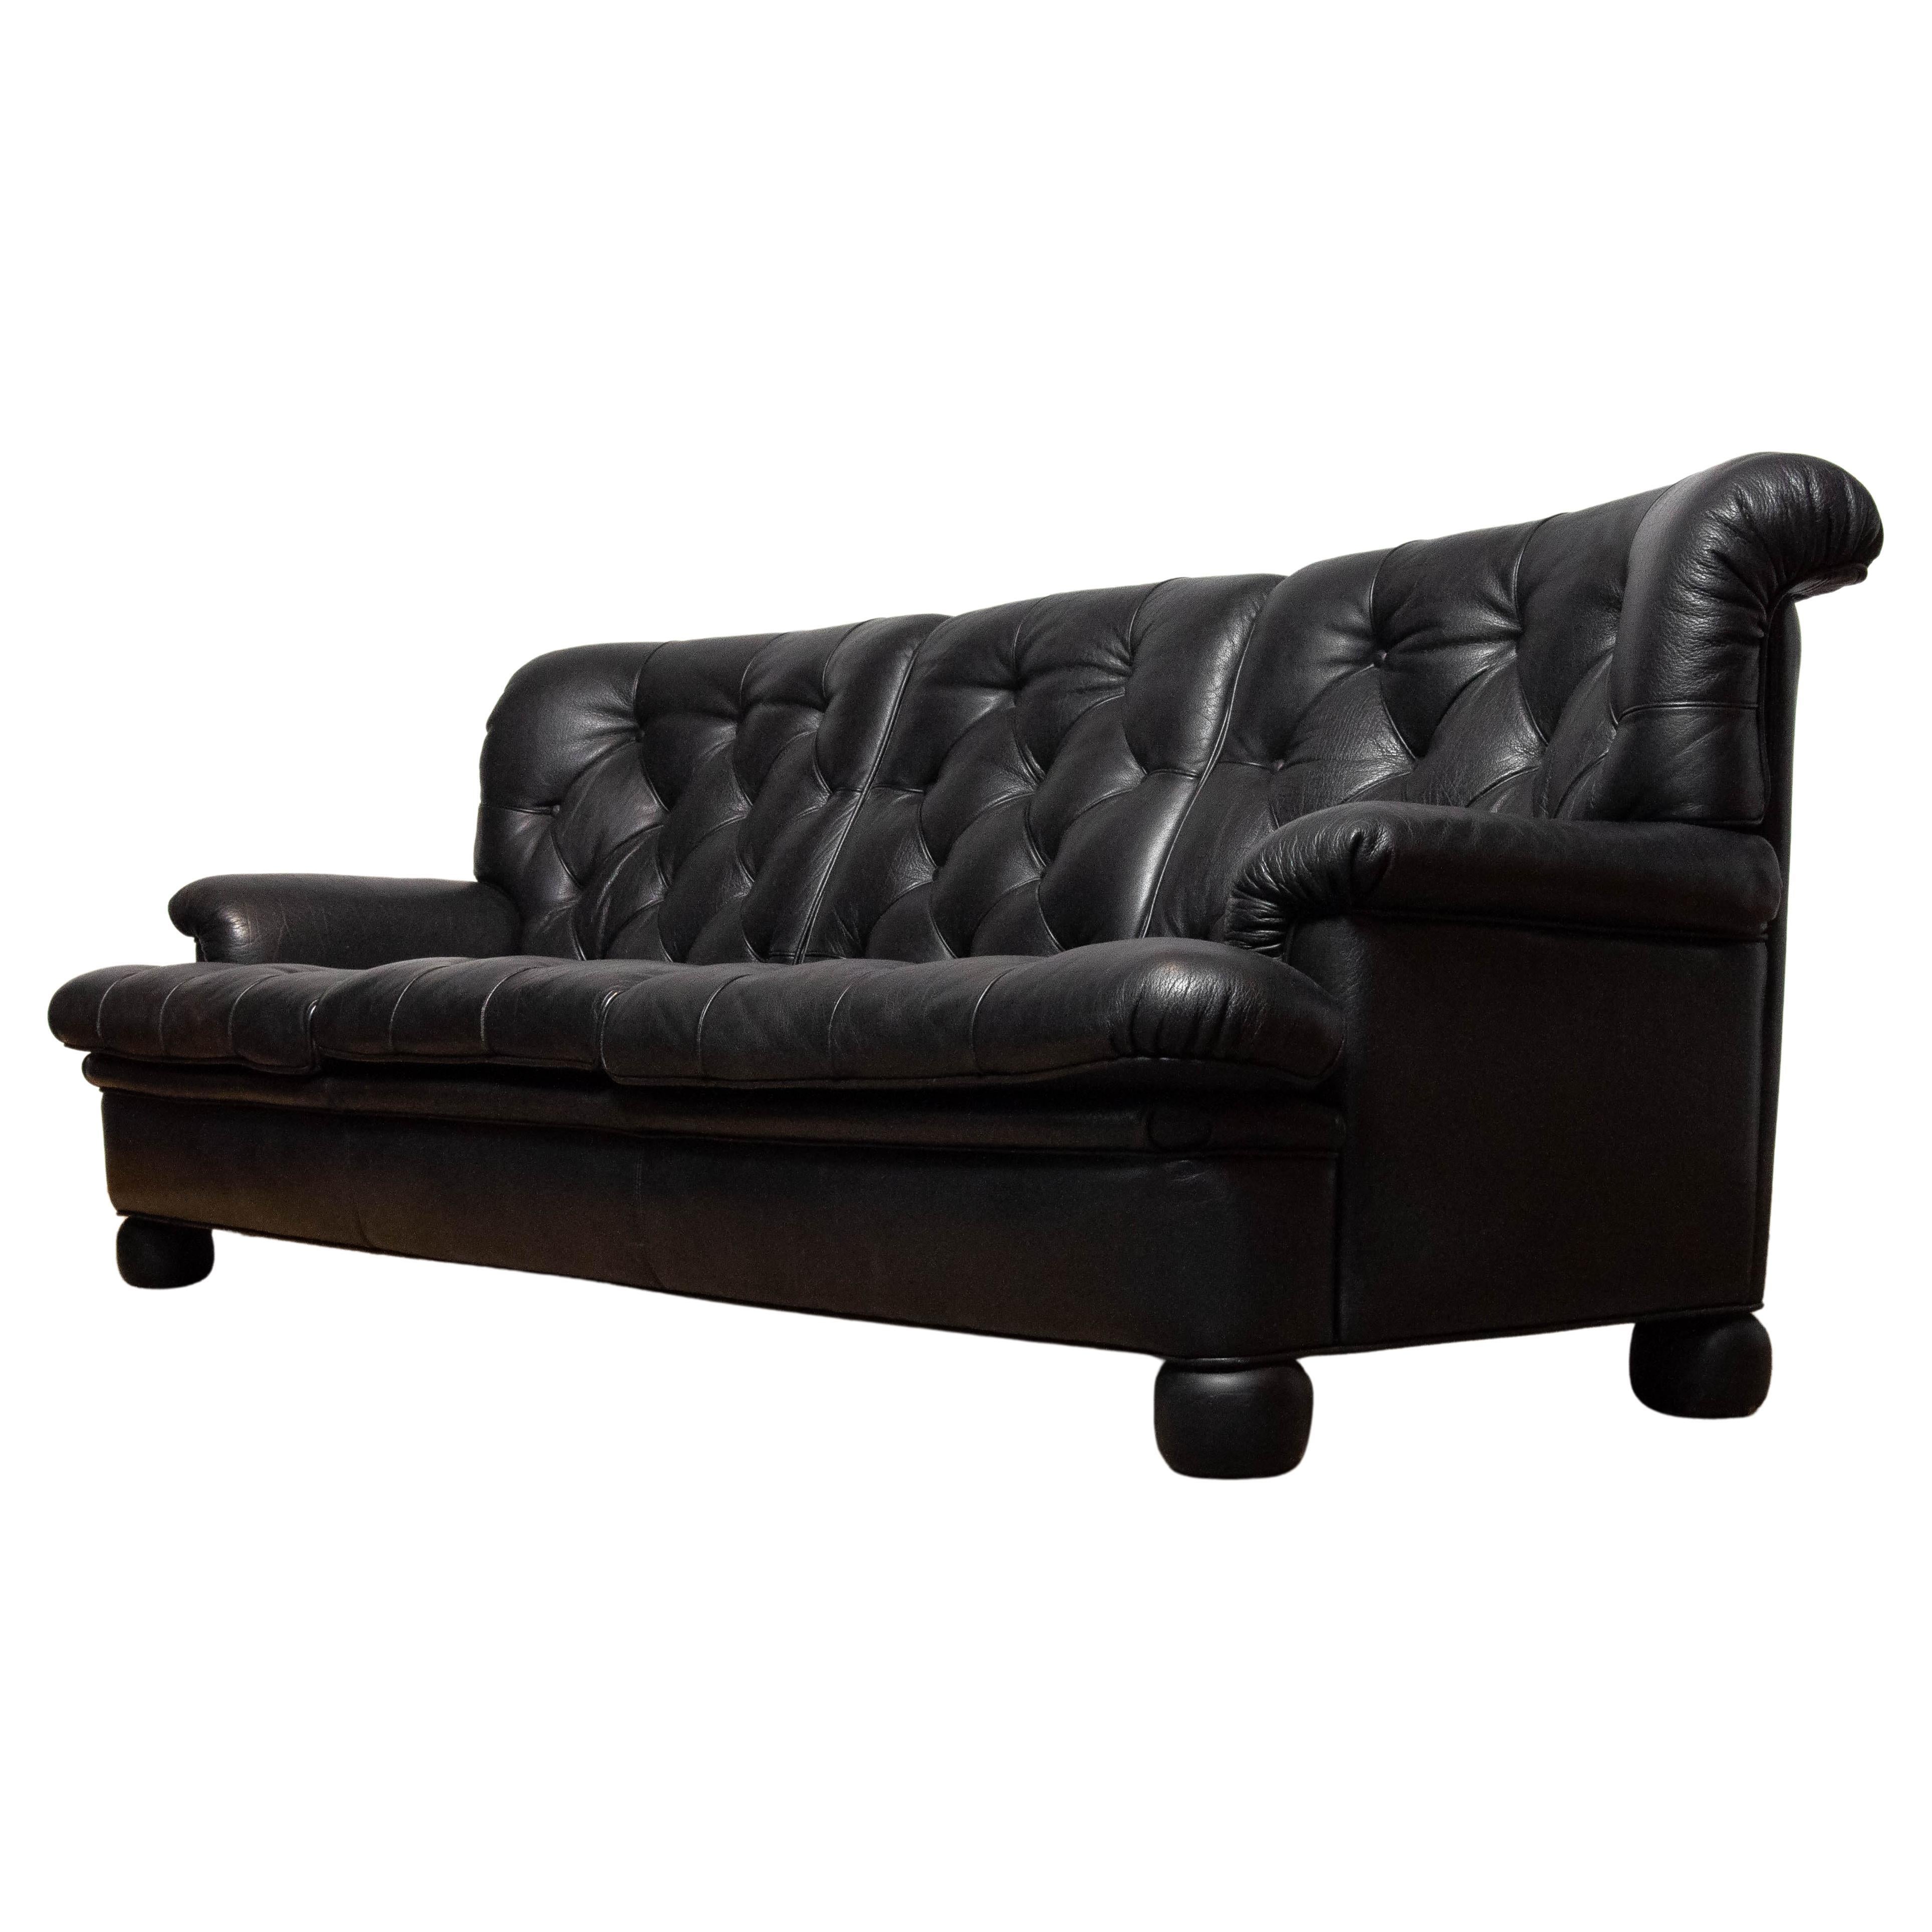 1960 Black Leather Chesterfield Model 'Jupiter' Three Seater Sofa by Arne Norell For Sale